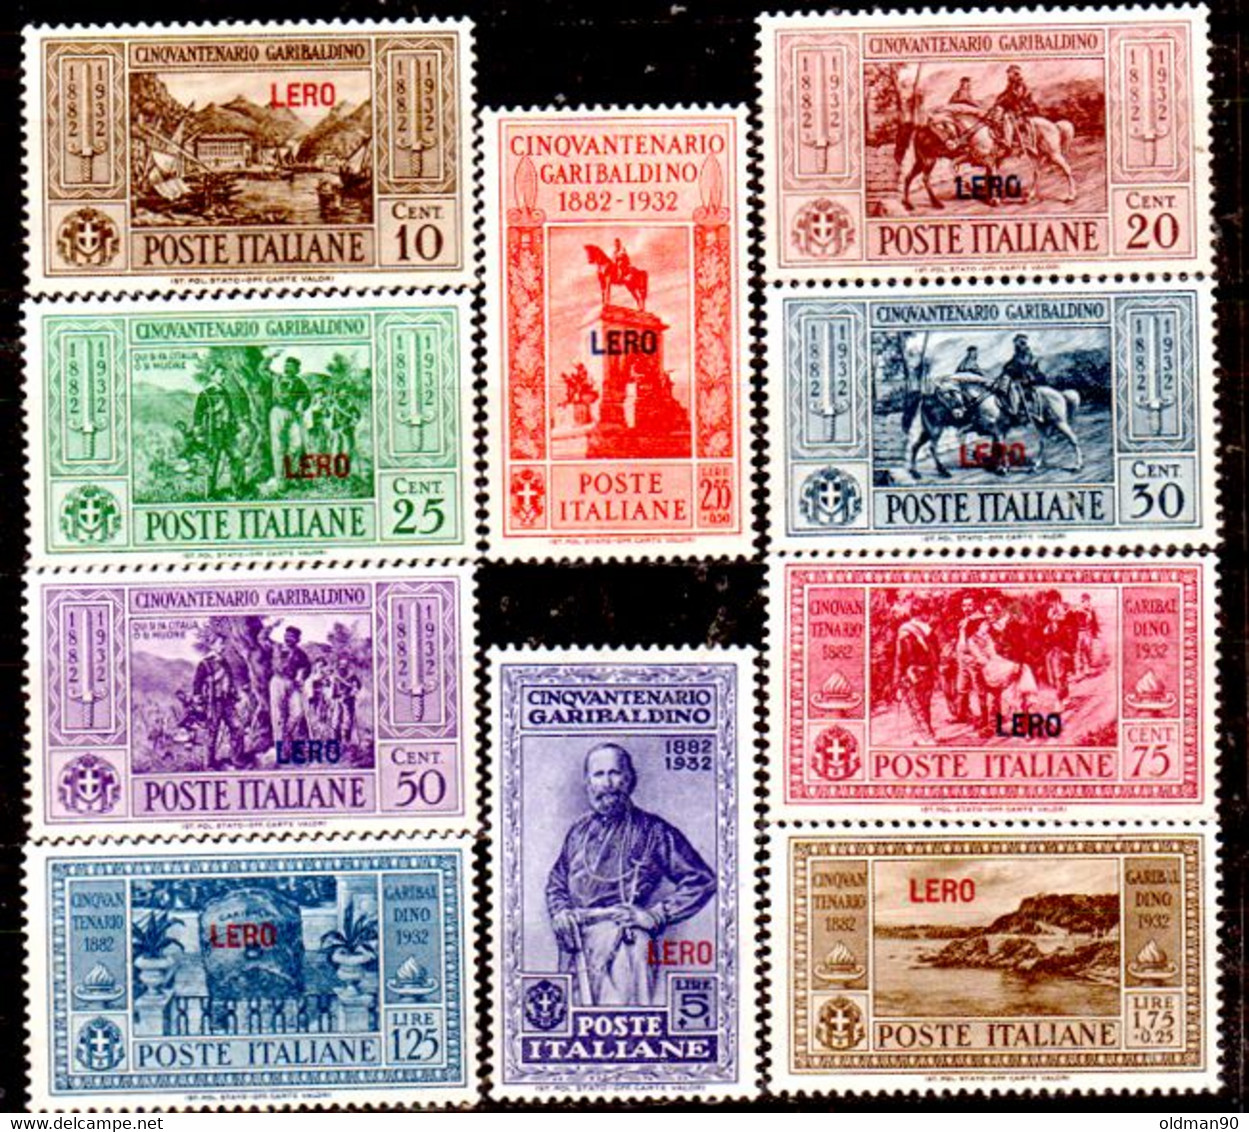 Egeo-OS-295- Lero: Original Stamp And Overprint 1932 (++) MNH - Quality In Your Opinion. - Egée (Lero)